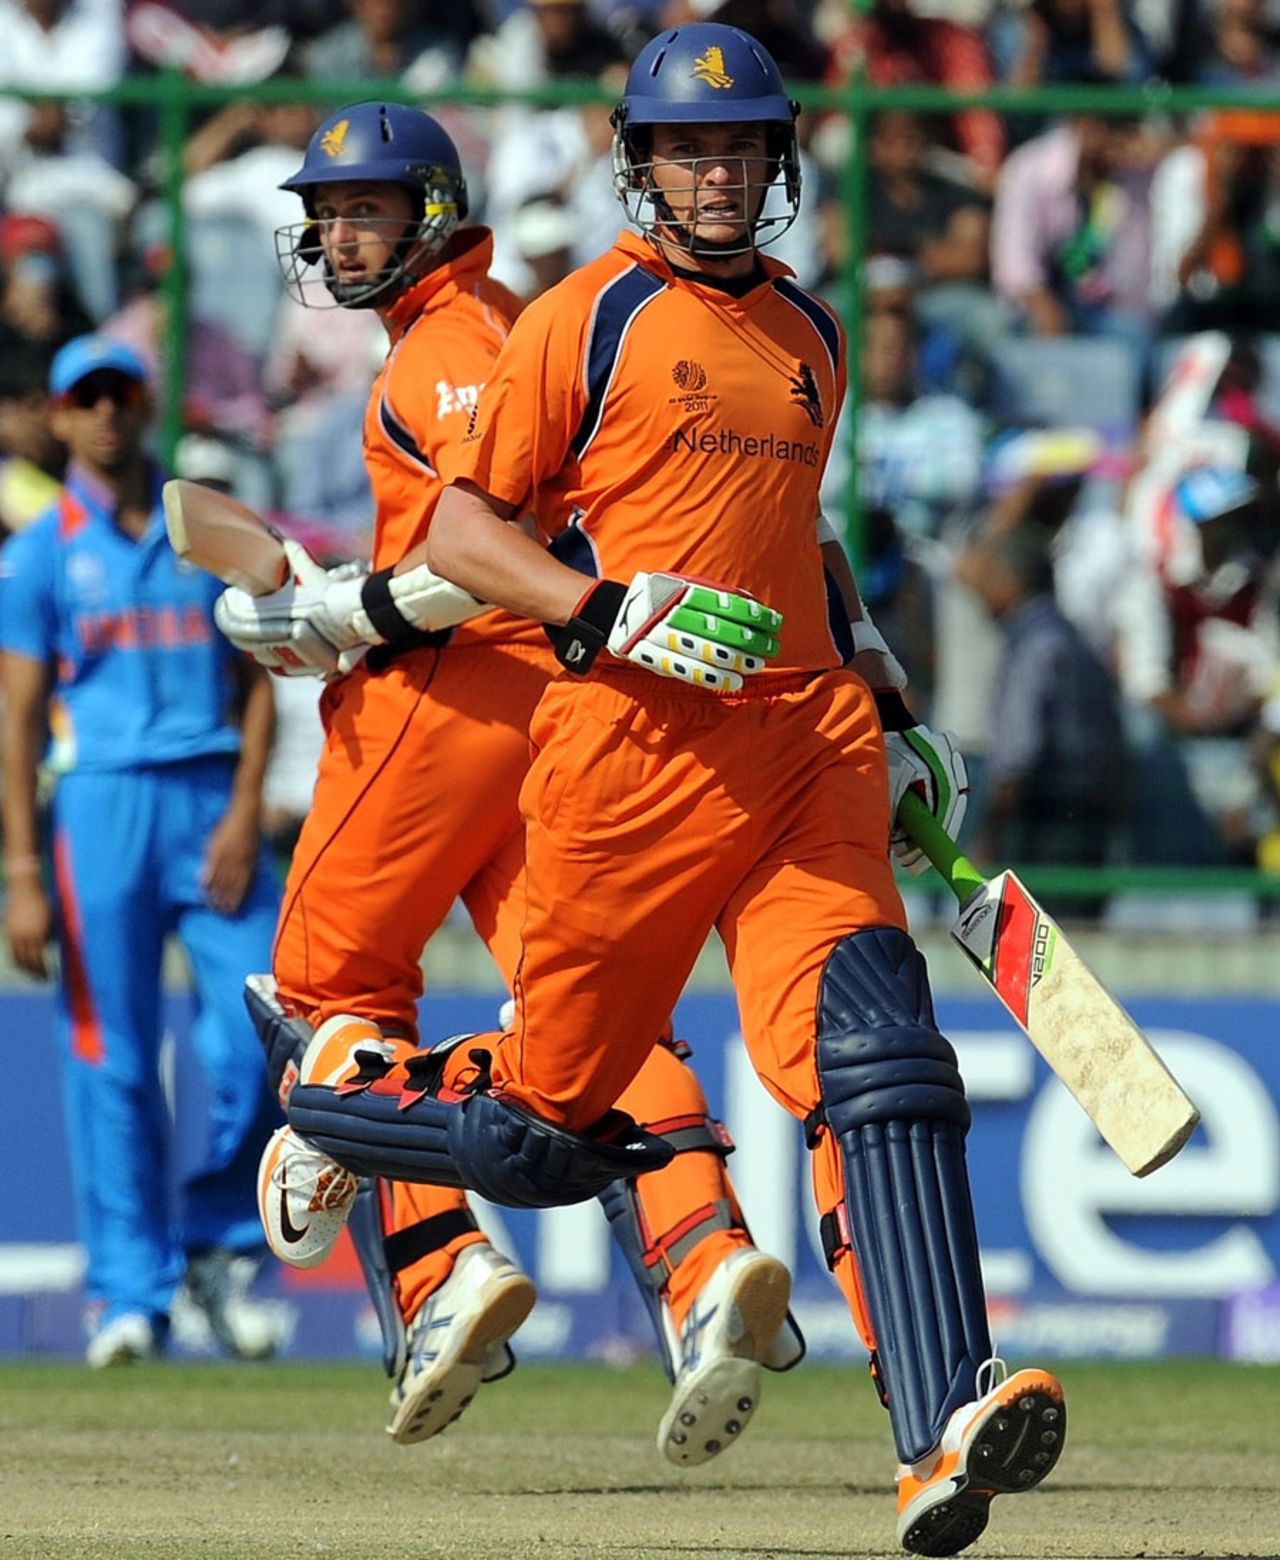 Eric Szwarczynski and Wesley Barresi take a run during their half-century stand, India v Netherlands, Group B, World Cup, Delhi, March 9, 2011